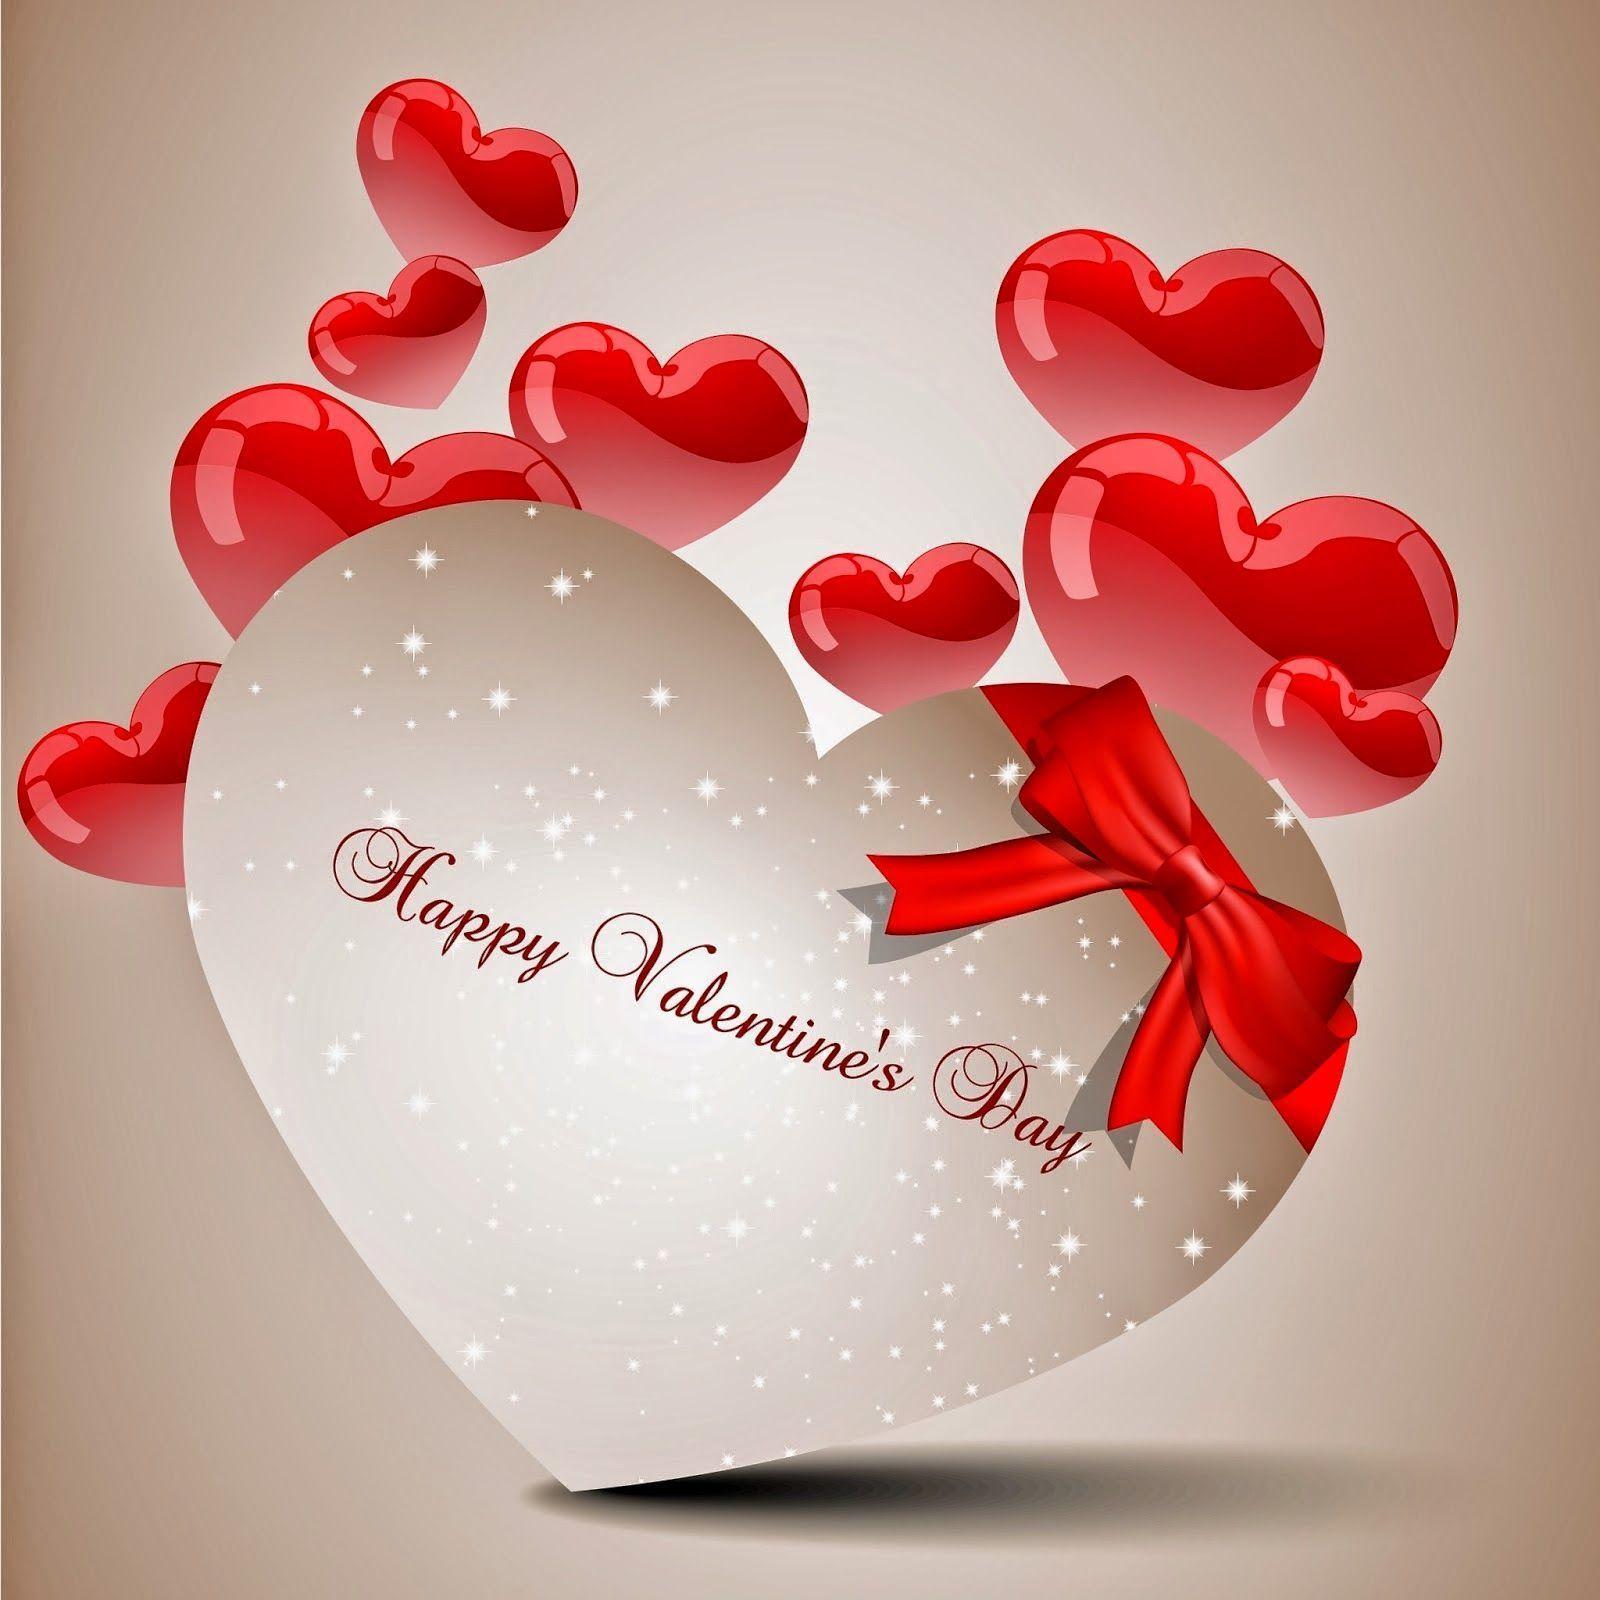 Happy Valentines Day 2015 greetings, wallpaper, image, sms